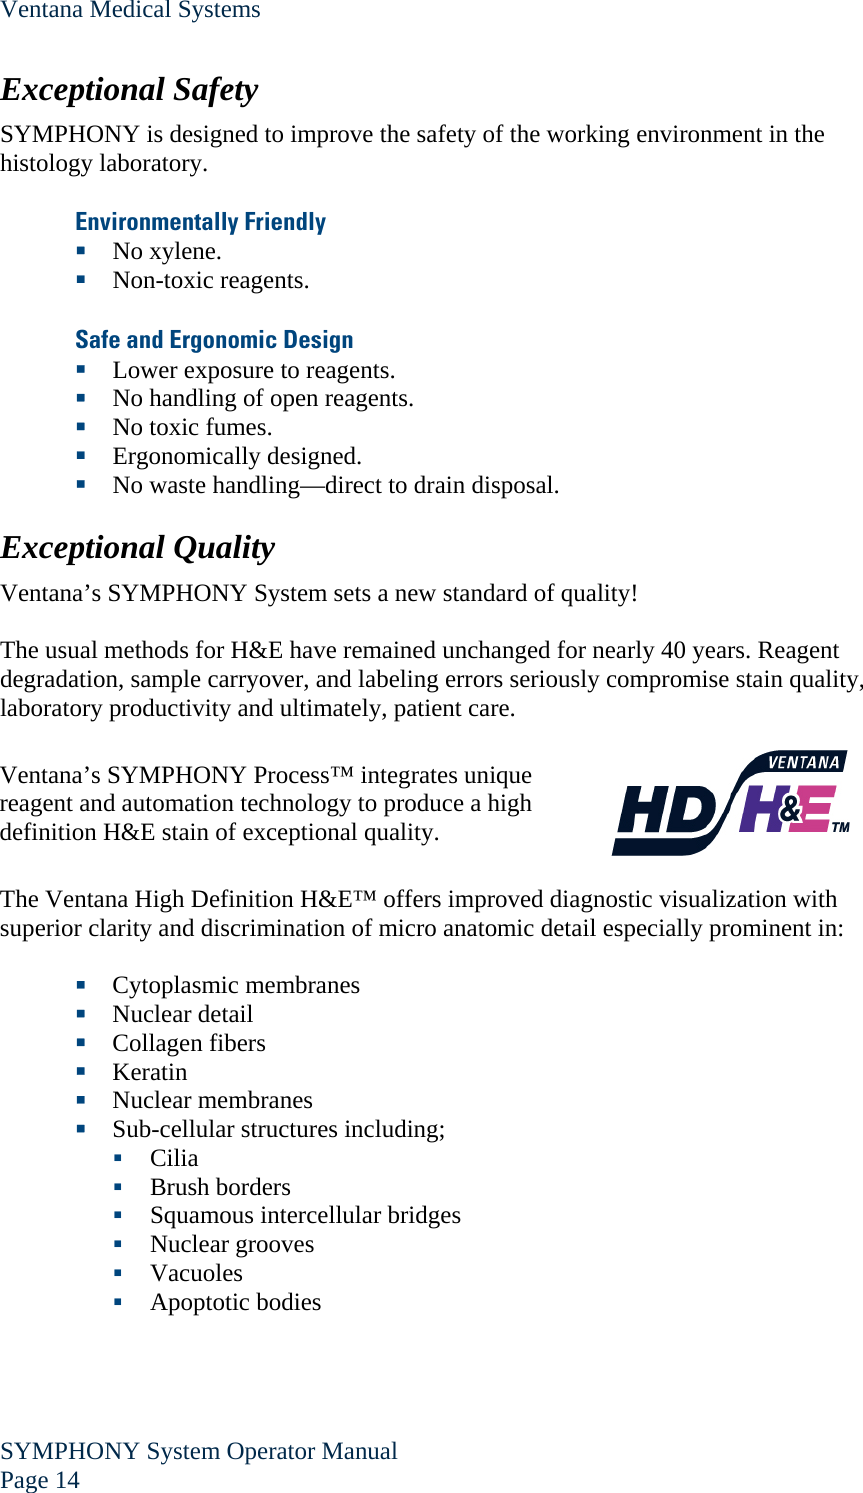 Ventana Medical Systems SYMPHONY System Operator Manual Page 14    Exceptional Safety SYMPHONY is designed to improve the safety of the working environment in the histology laboratory.  Environmentally Friendly  No xylene.  Non-toxic reagents.  Safe and Ergonomic Design  Lower exposure to reagents.  No handling of open reagents.  No toxic fumes.  Ergonomically designed.  No waste handling—direct to drain disposal.  Exceptional Quality Ventana’s SYMPHONY System sets a new standard of quality!  The usual methods for H&amp;E have remained unchanged for nearly 40 years. Reagent degradation, sample carryover, and labeling errors seriously compromise stain quality, laboratory productivity and ultimately, patient care.  Ventana’s SYMPHONY Process™ integrates unique reagent and automation technology to produce a high definition H&amp;E stain of exceptional quality.    The Ventana High Definition H&amp;E™ offers improved diagnostic visualization with superior clarity and discrimination of micro anatomic detail especially prominent in:   Cytoplasmic membranes  Nuclear detail  Collagen fibers  Keratin  Nuclear membranes  Sub-cellular structures including;  Cilia  Brush borders  Squamous intercellular bridges  Nuclear grooves  Vacuoles  Apoptotic bodies  